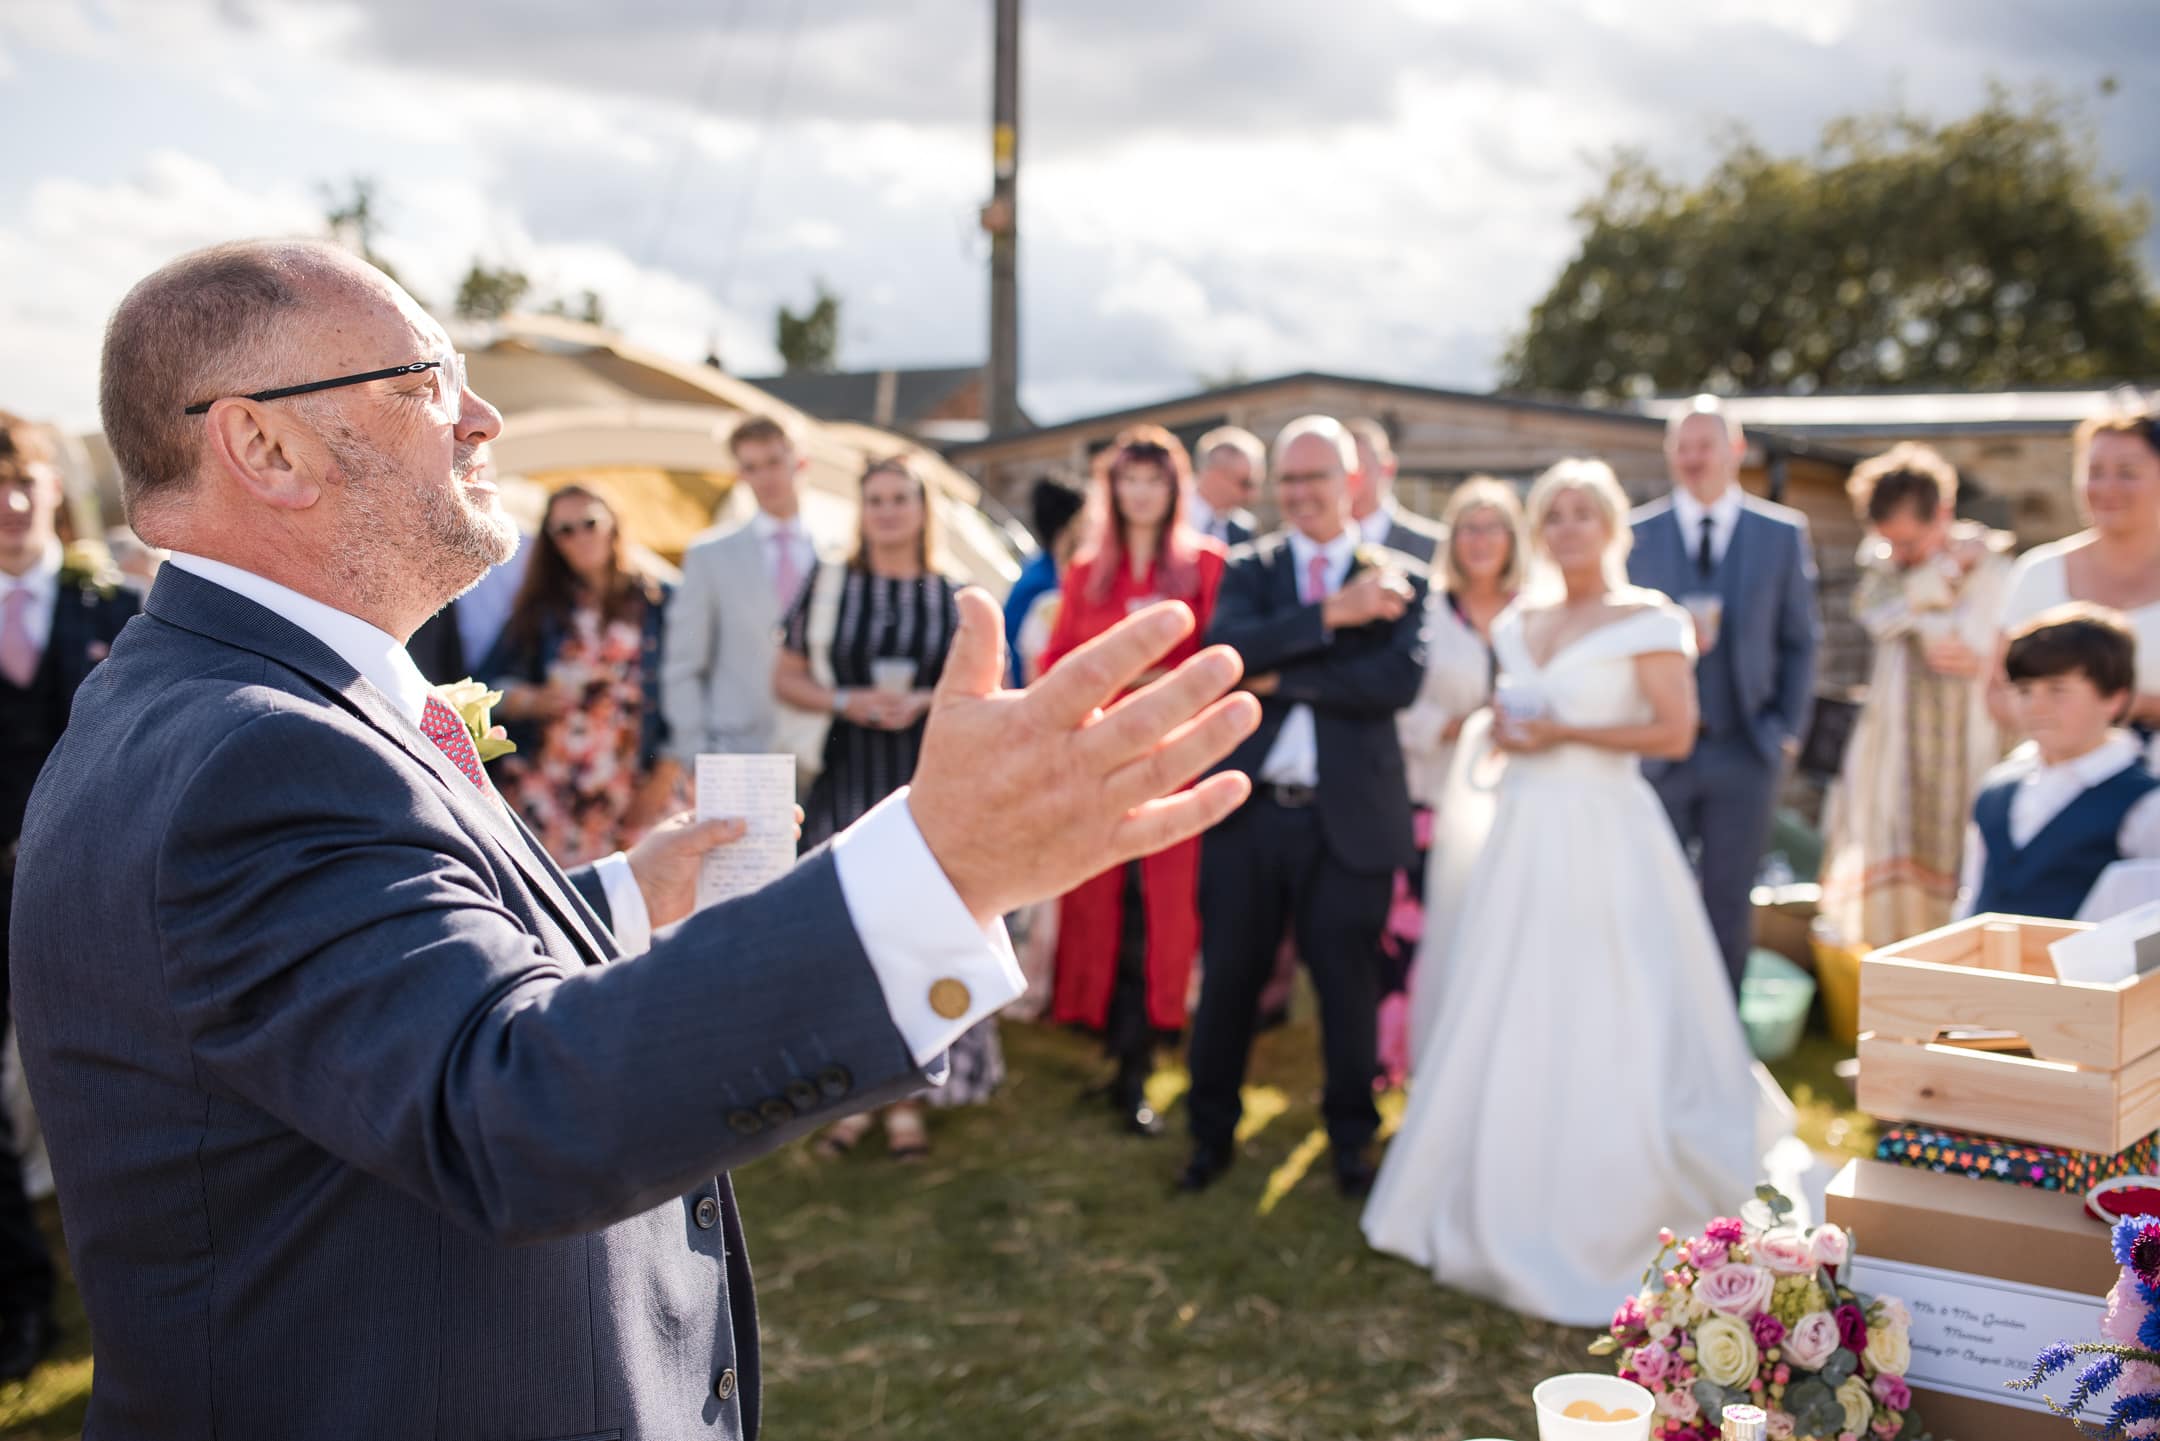 Best man doing his speech with guests in the background